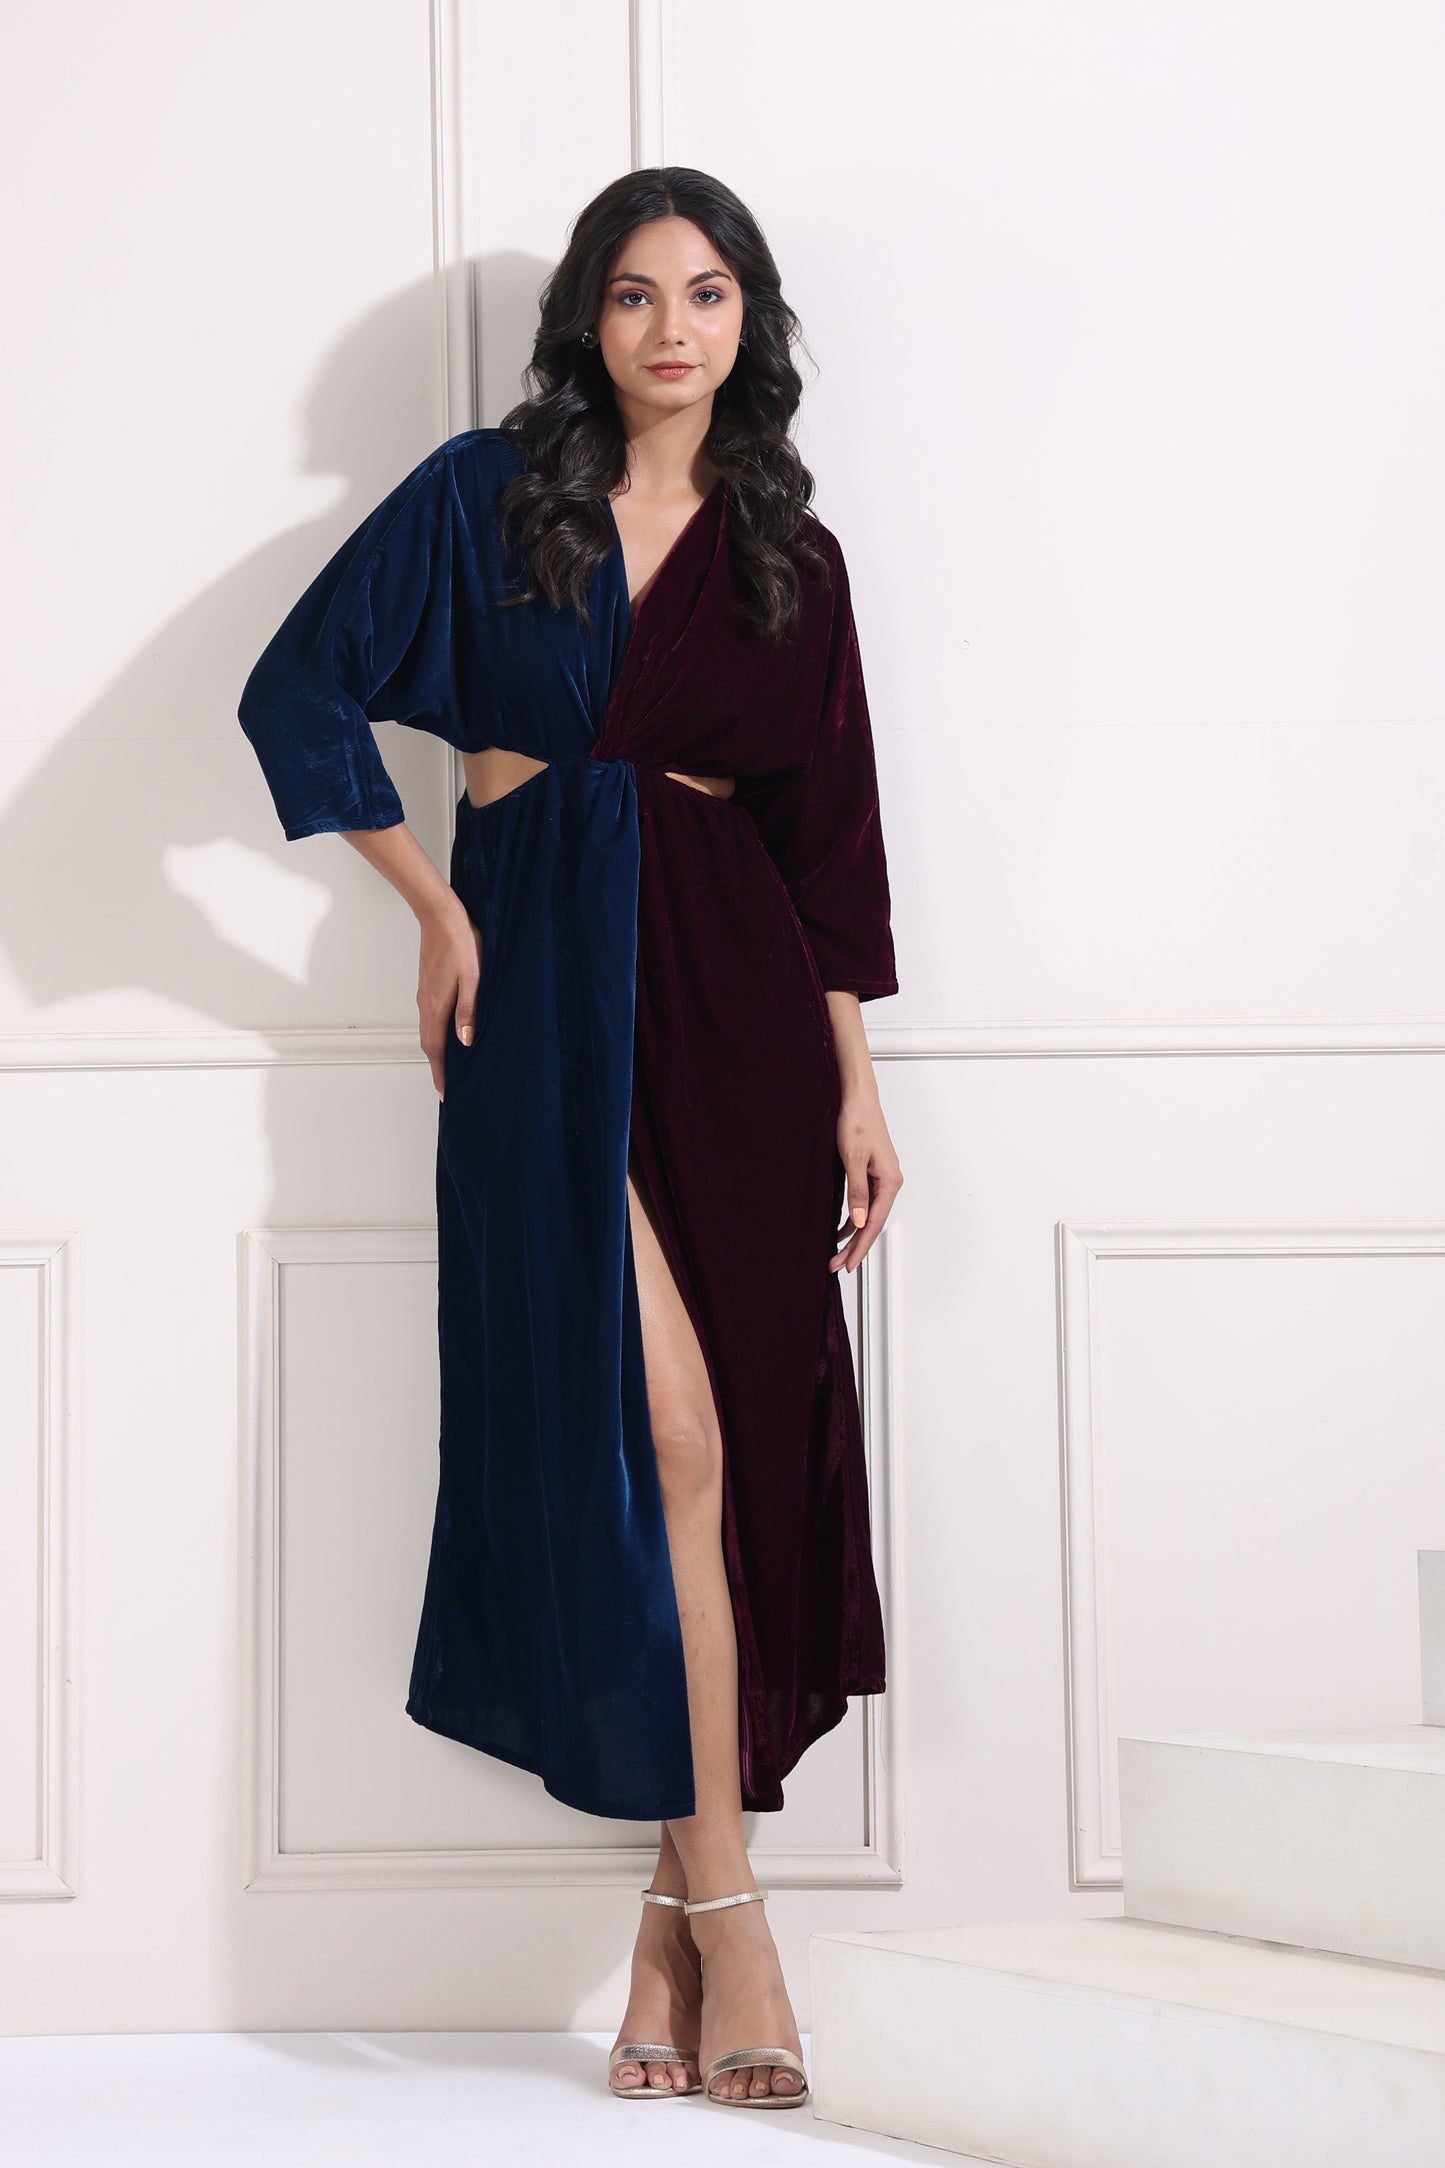 Blue and Wine Half-and-Half Knotted Dress